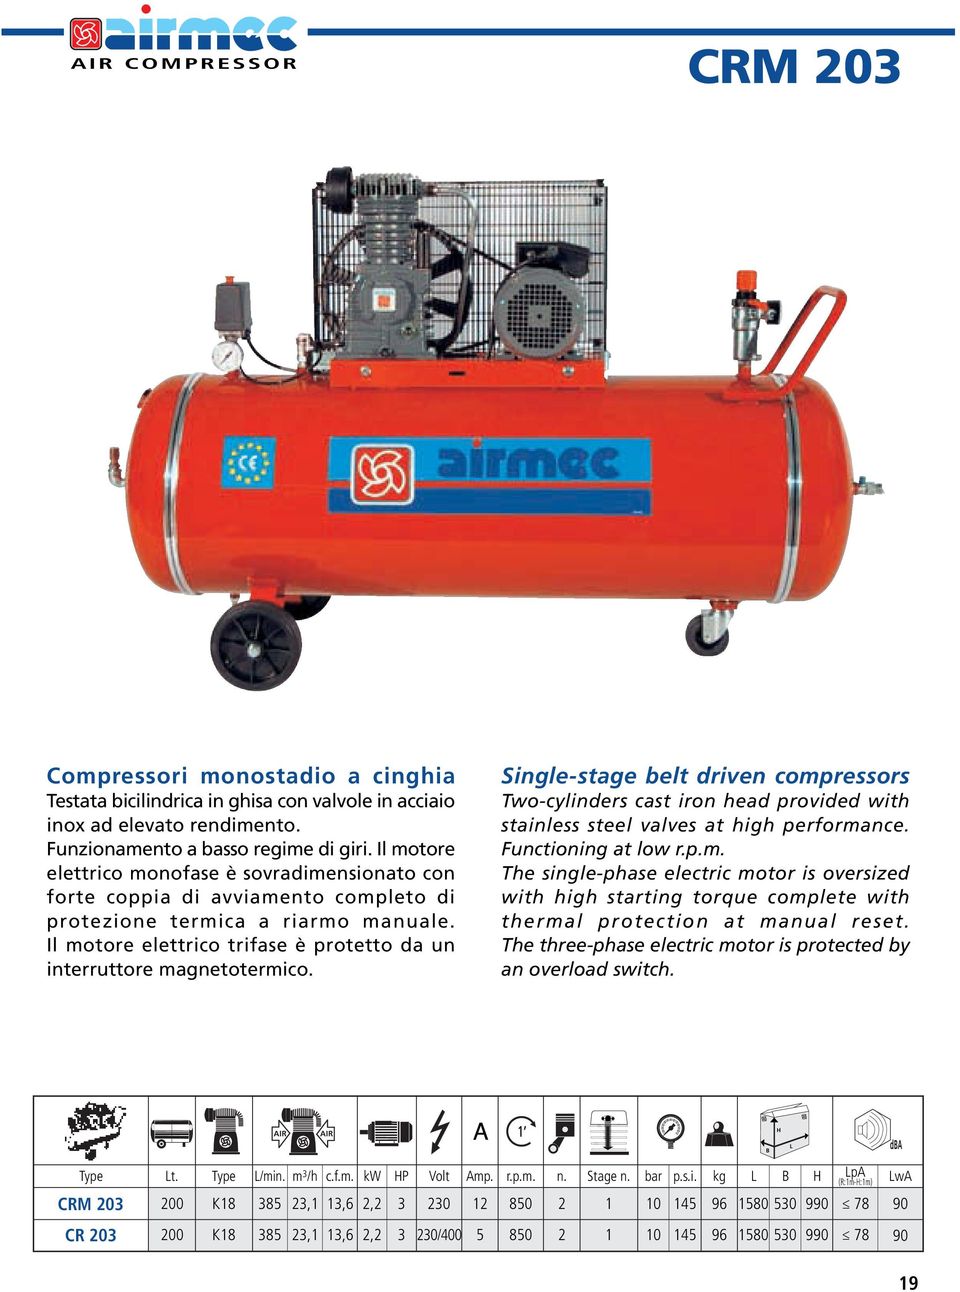 Il motore elettrico trifase è protetto da un interruttore magnetotermico. Single-stage belt driven compressors Two-cylinders cast iron head provided with stainless steel valves at high performance.